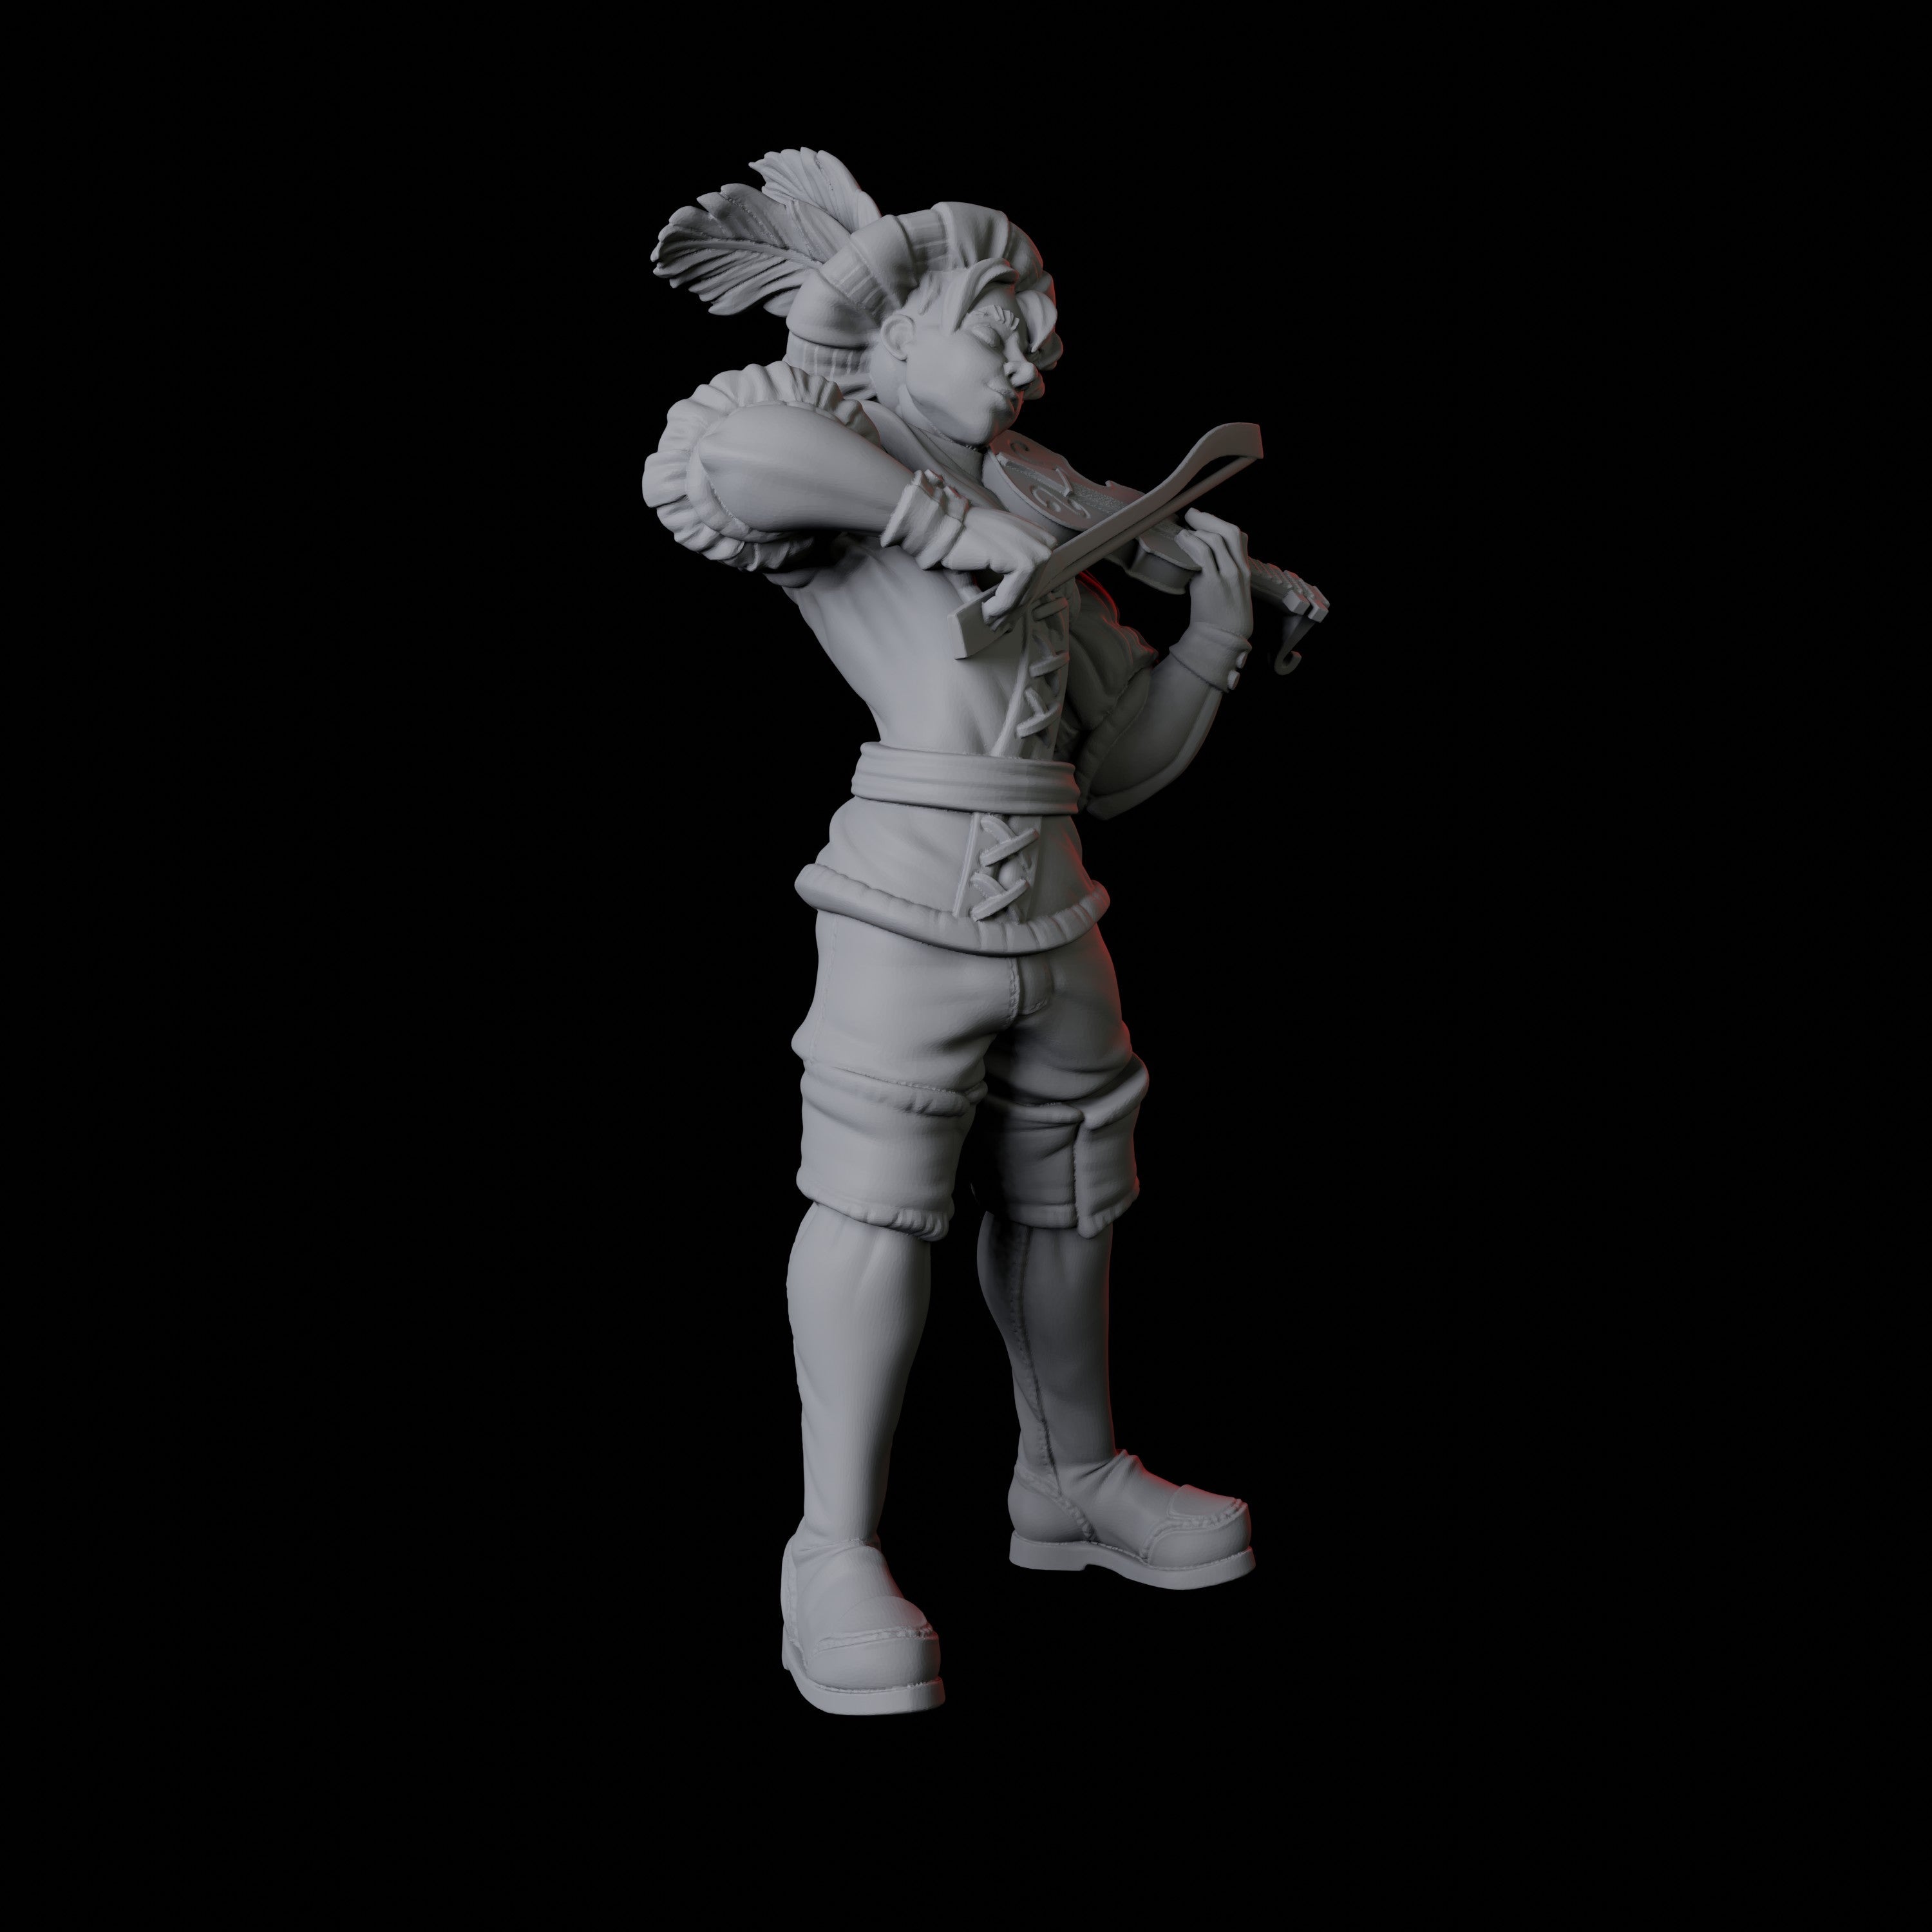 Violin Bard Miniature for Dungeons and Dragons